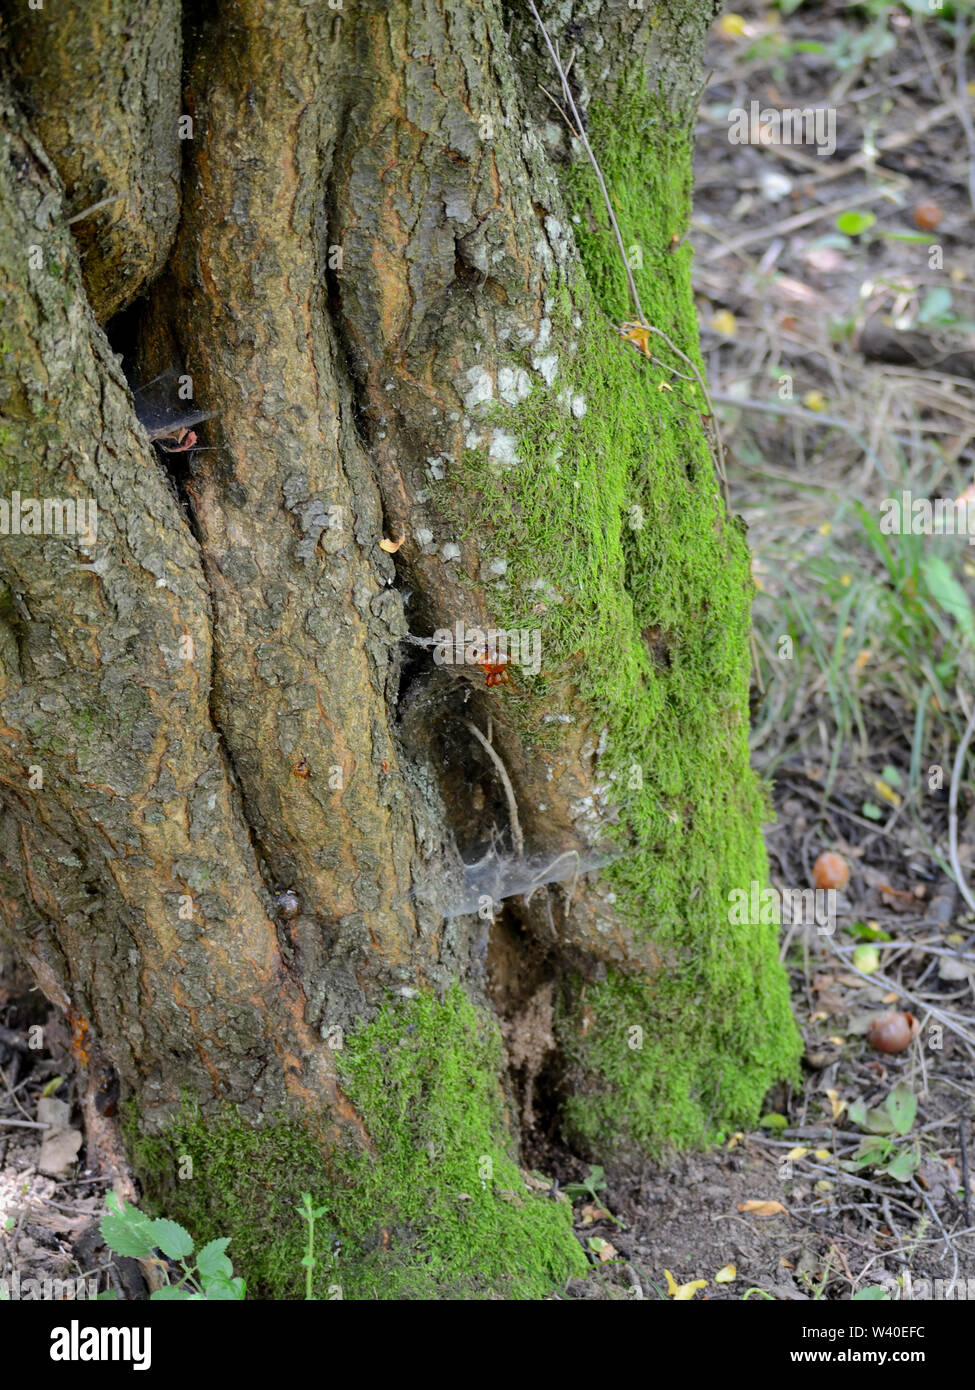 Mosses on old plum tree trunk Stock Photo